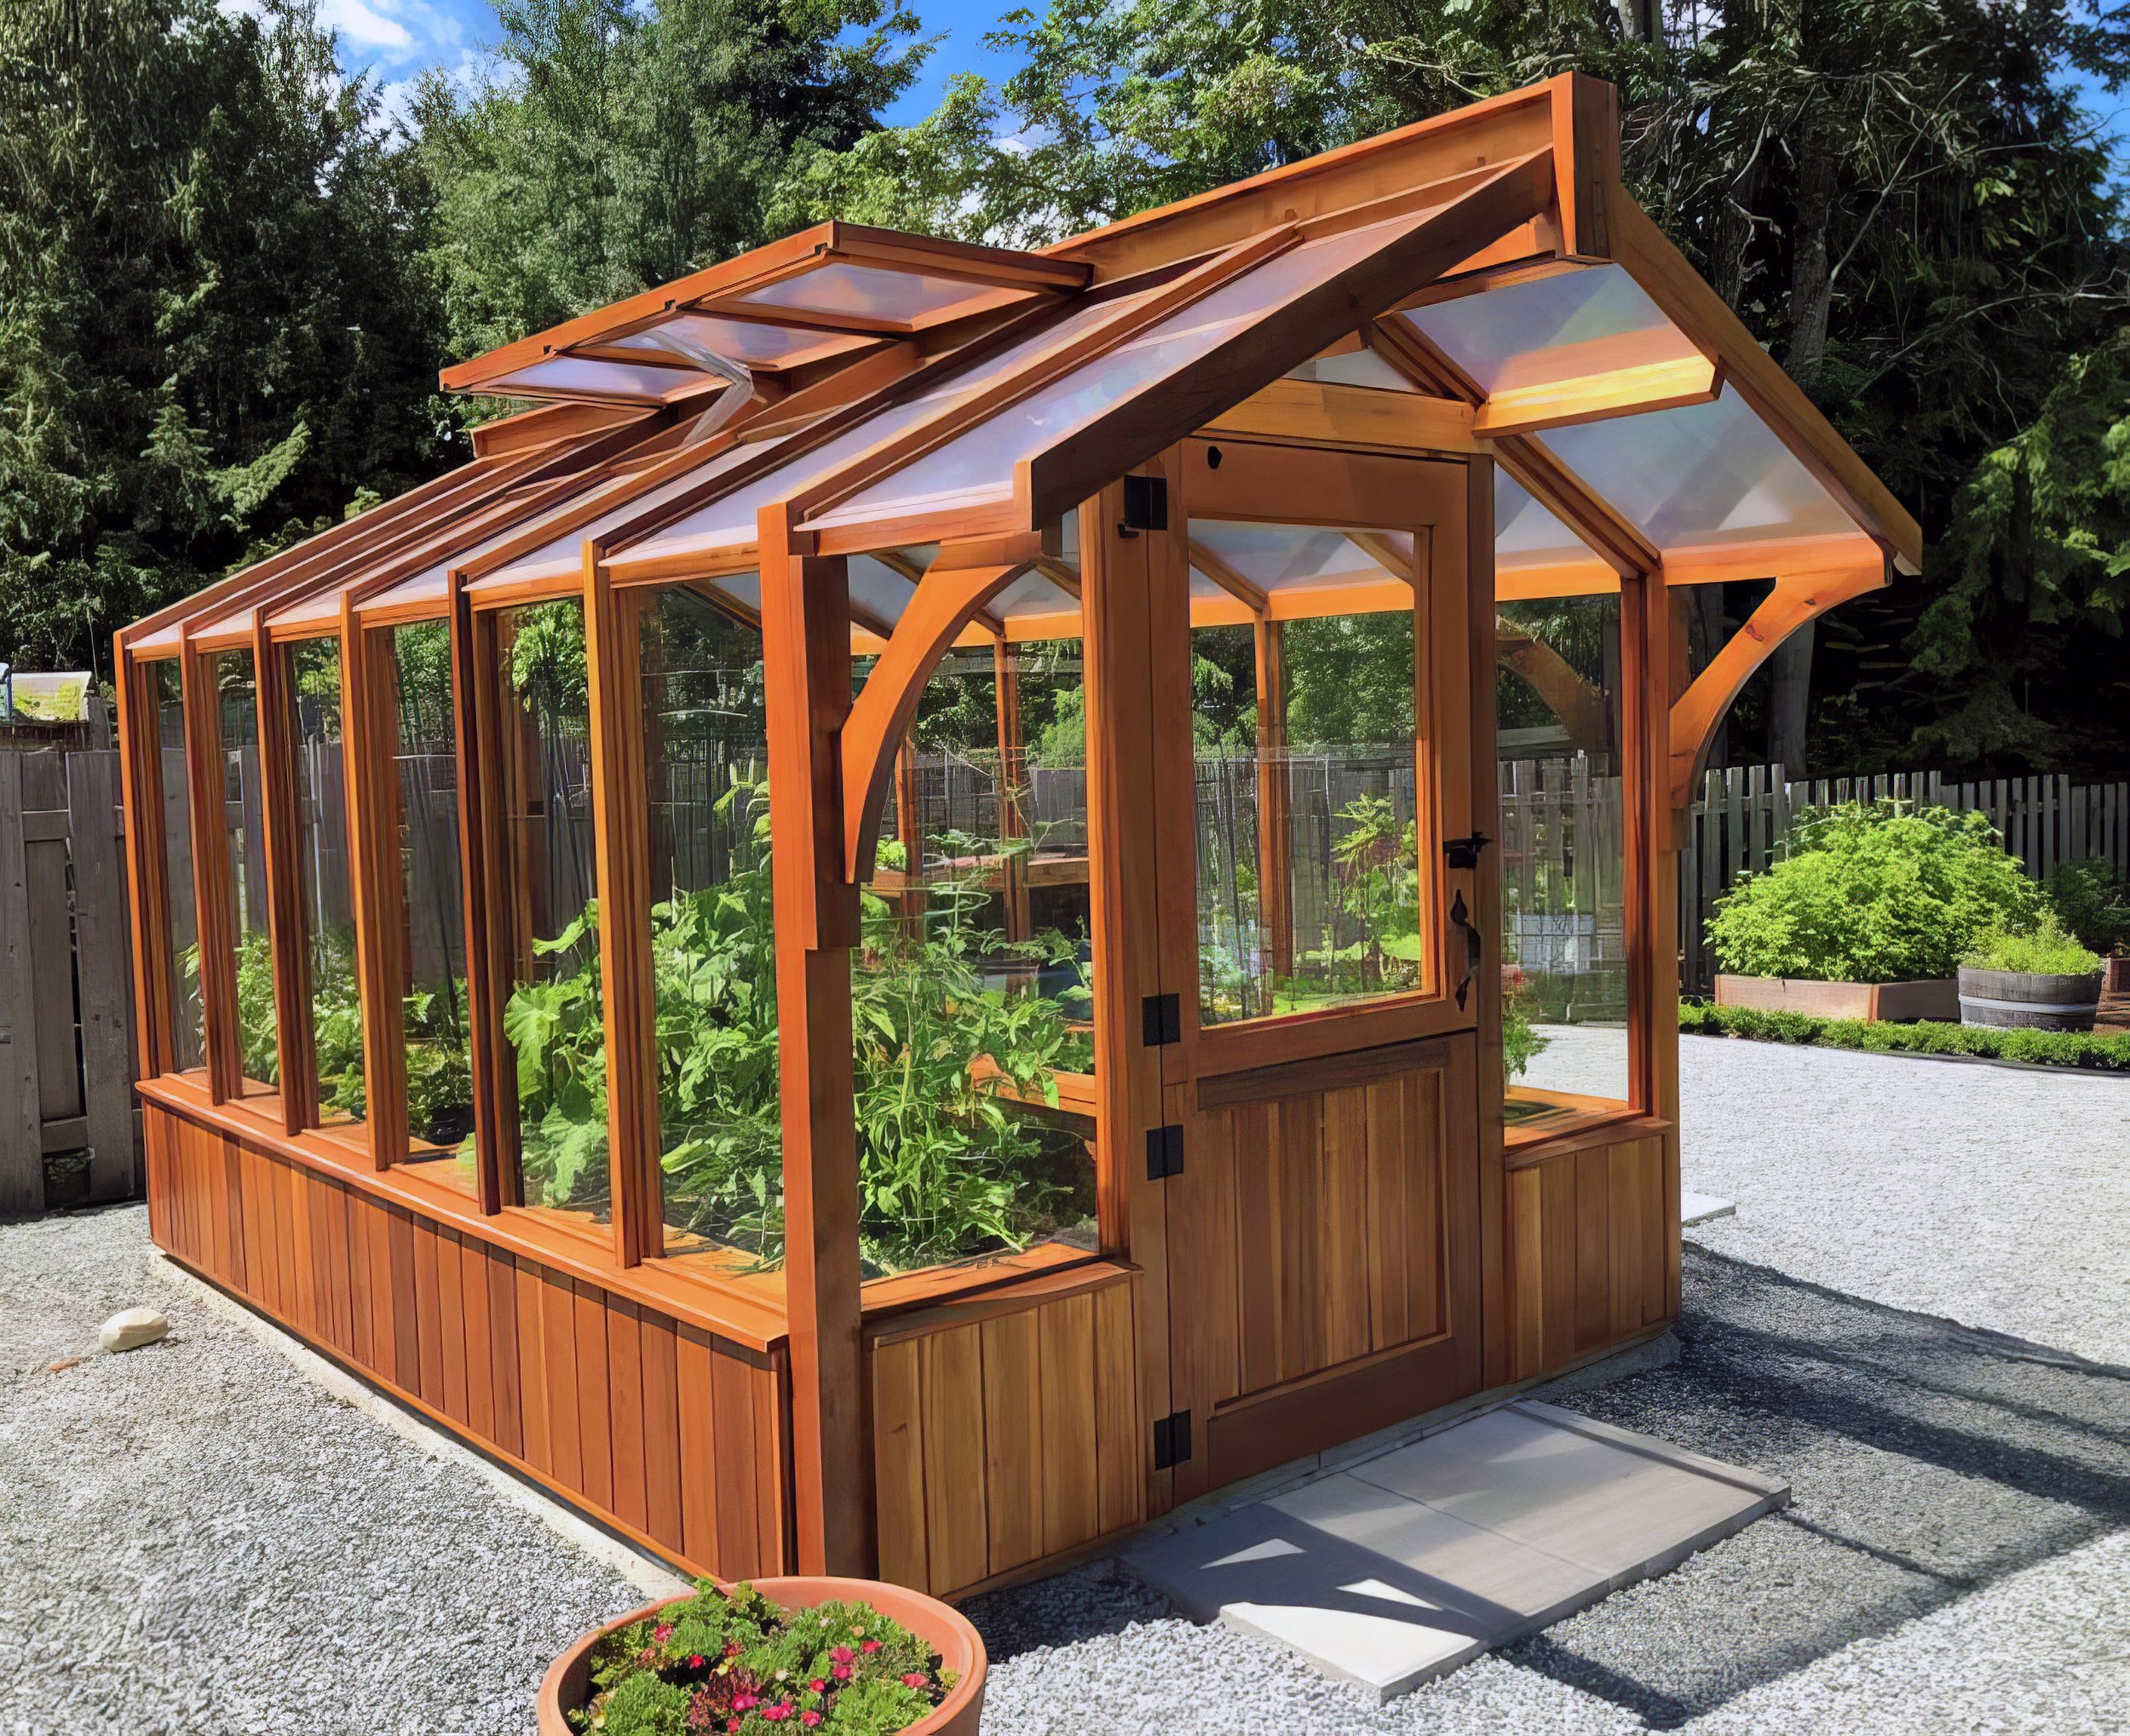 The Benefits of Choosing a Pre-made Greenhouse for Your Home Garden